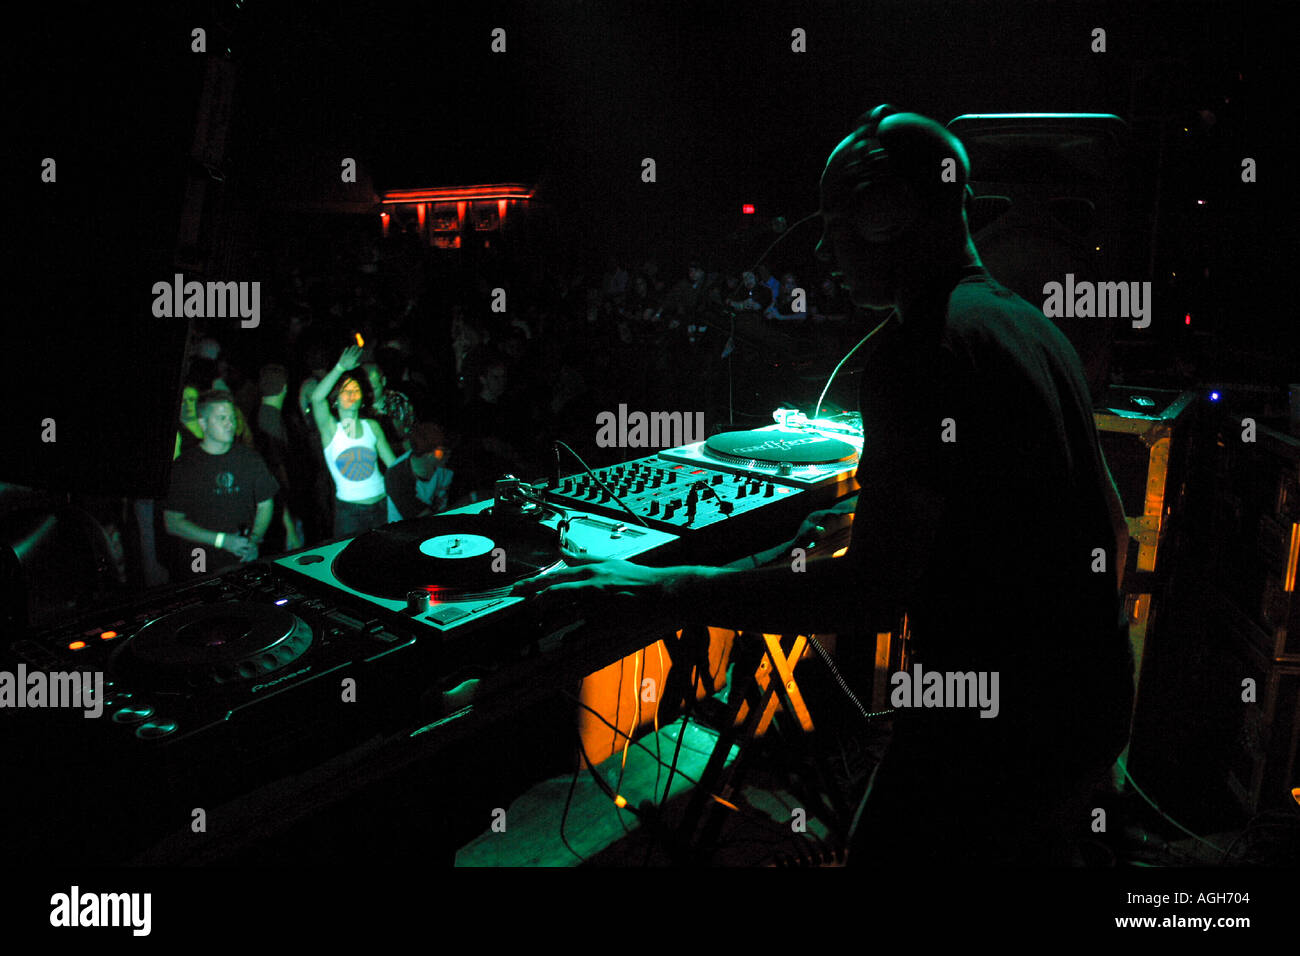 dj hyper playing at a club in tampa florida Stock Photo